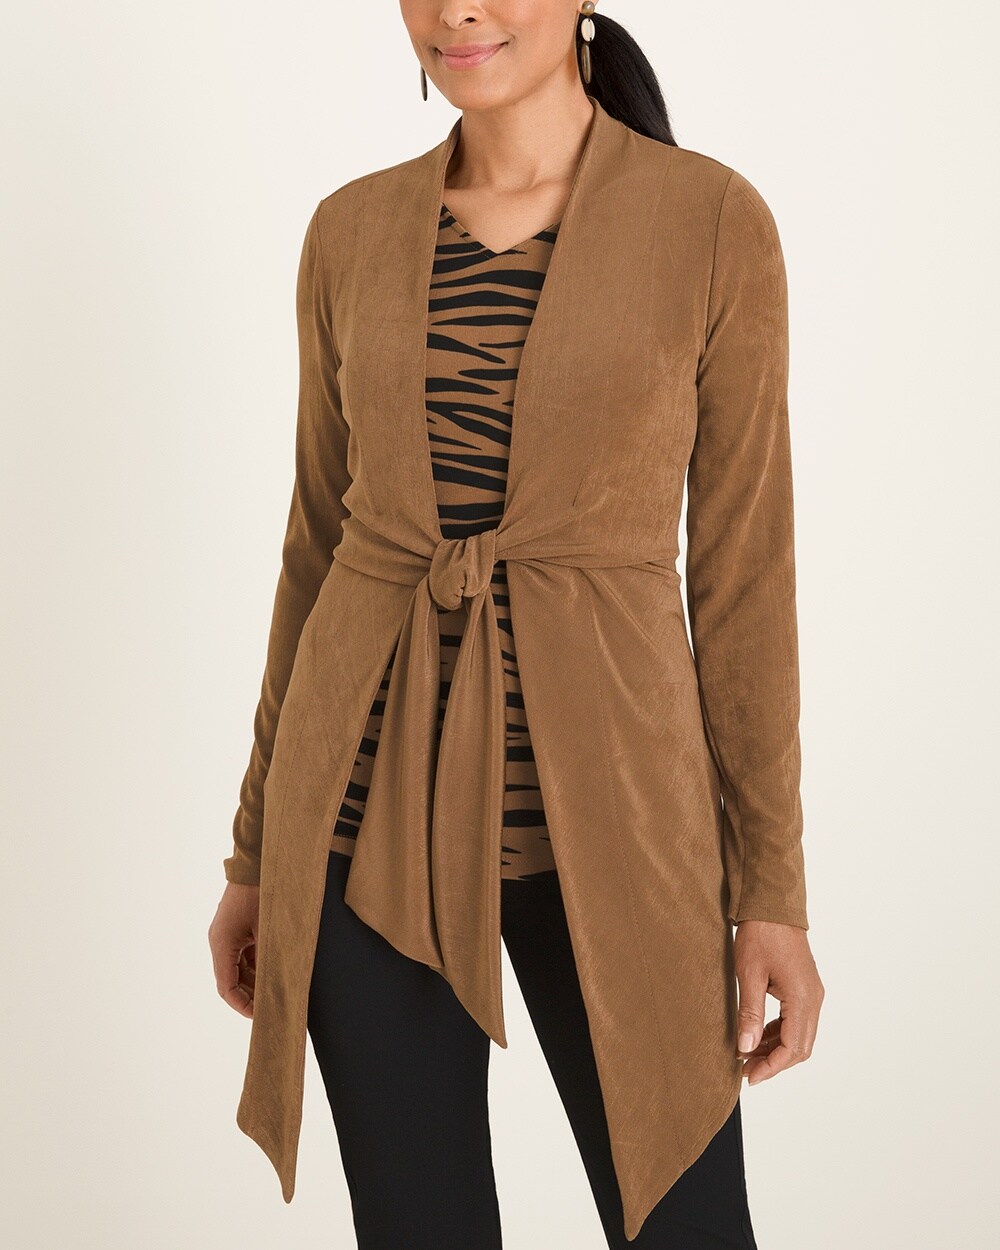 Travelers Classic Long Tie-Front Cardigan